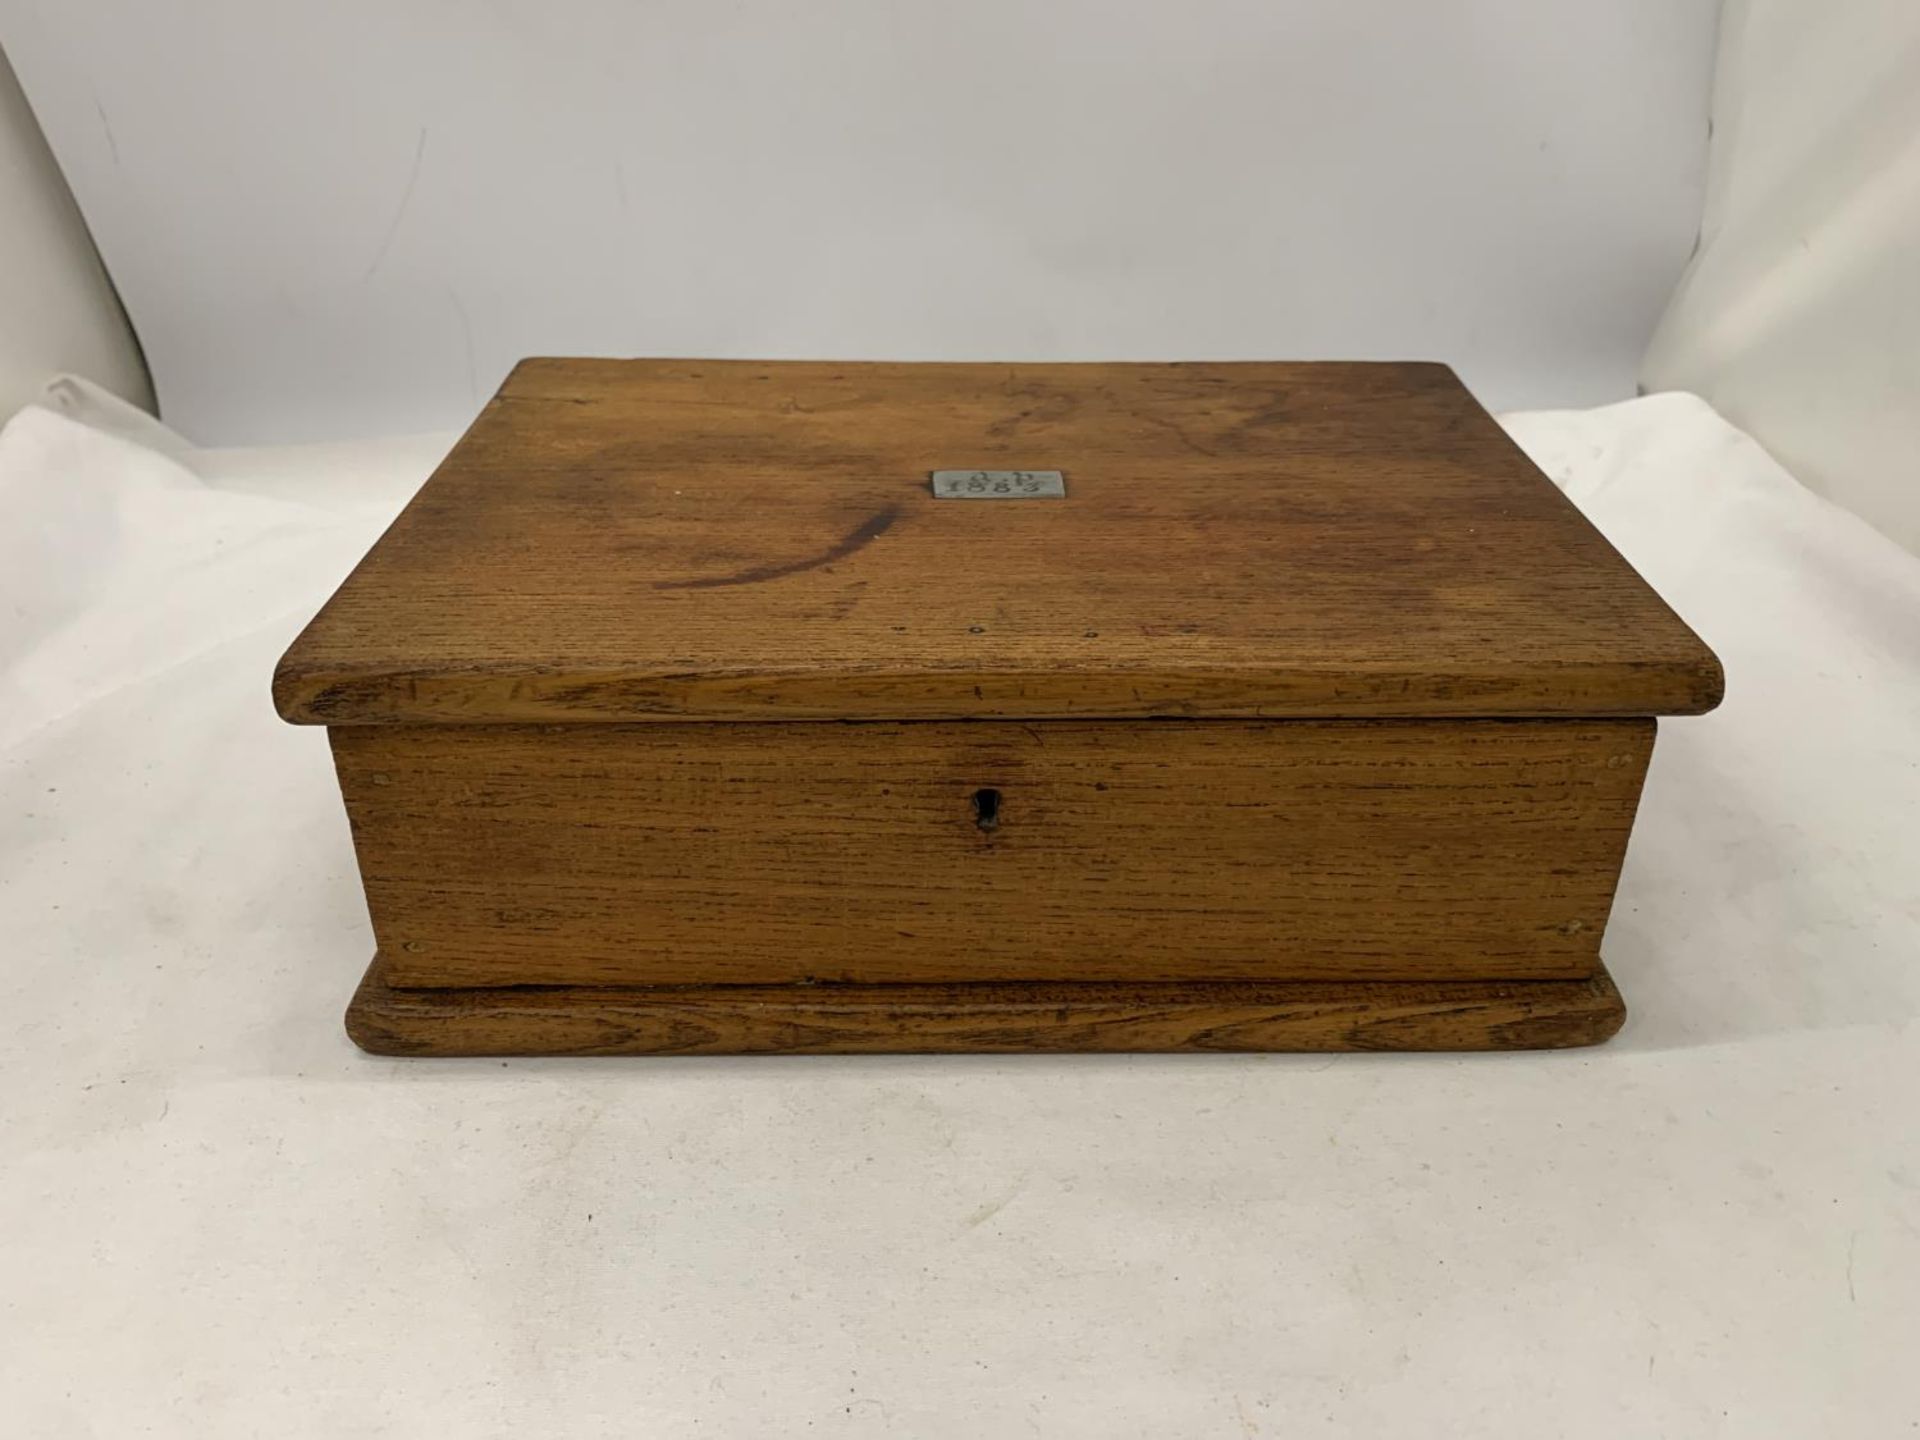 AN 1883 VICTORIAN SEWING BOX WITH CONTENTS - Image 4 of 5